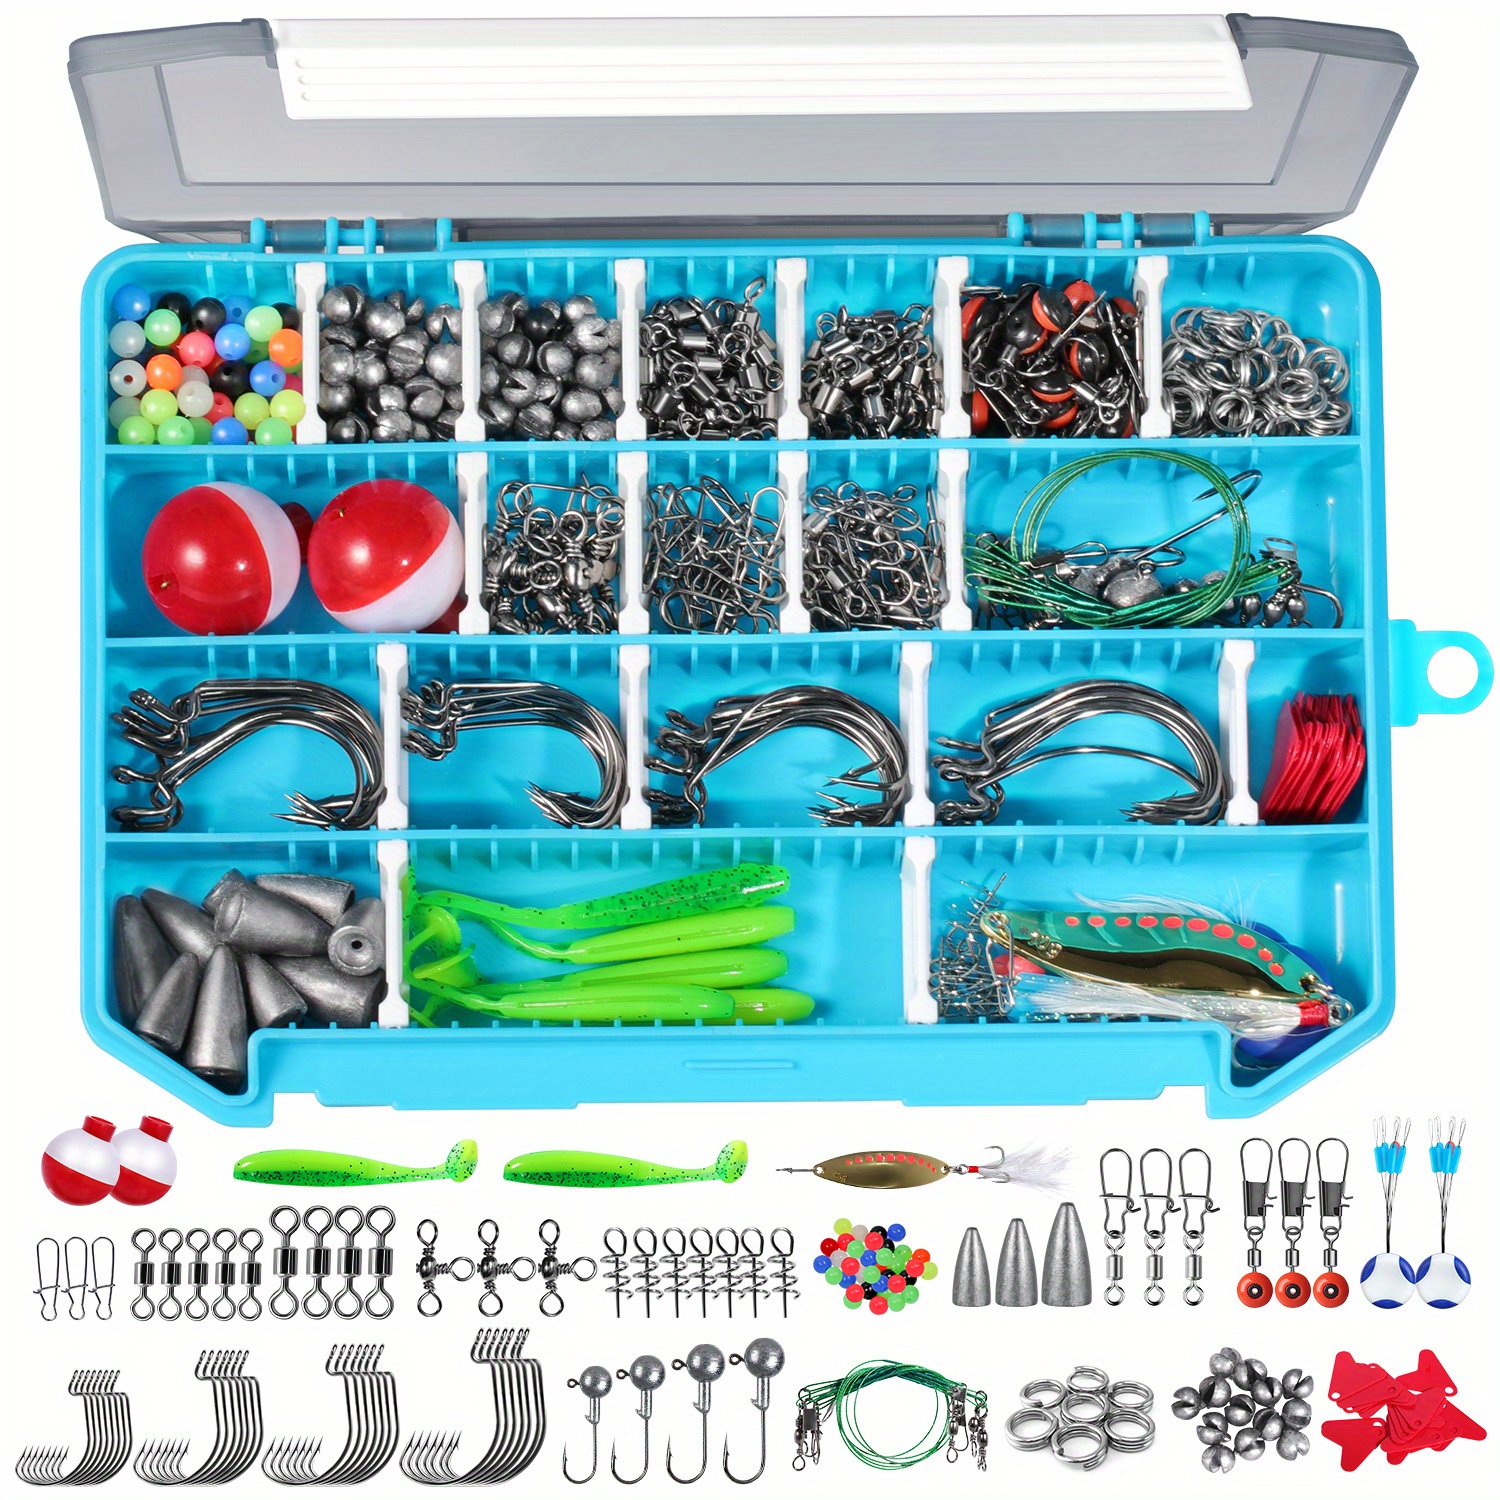 192/308pcs Fishing Accessories Kit, Fishing Tackle Kit With Storage Box  Including Jig Hooks, Bullet Weights, Sinker, Slides, Bobbers, Suitable For  Fre